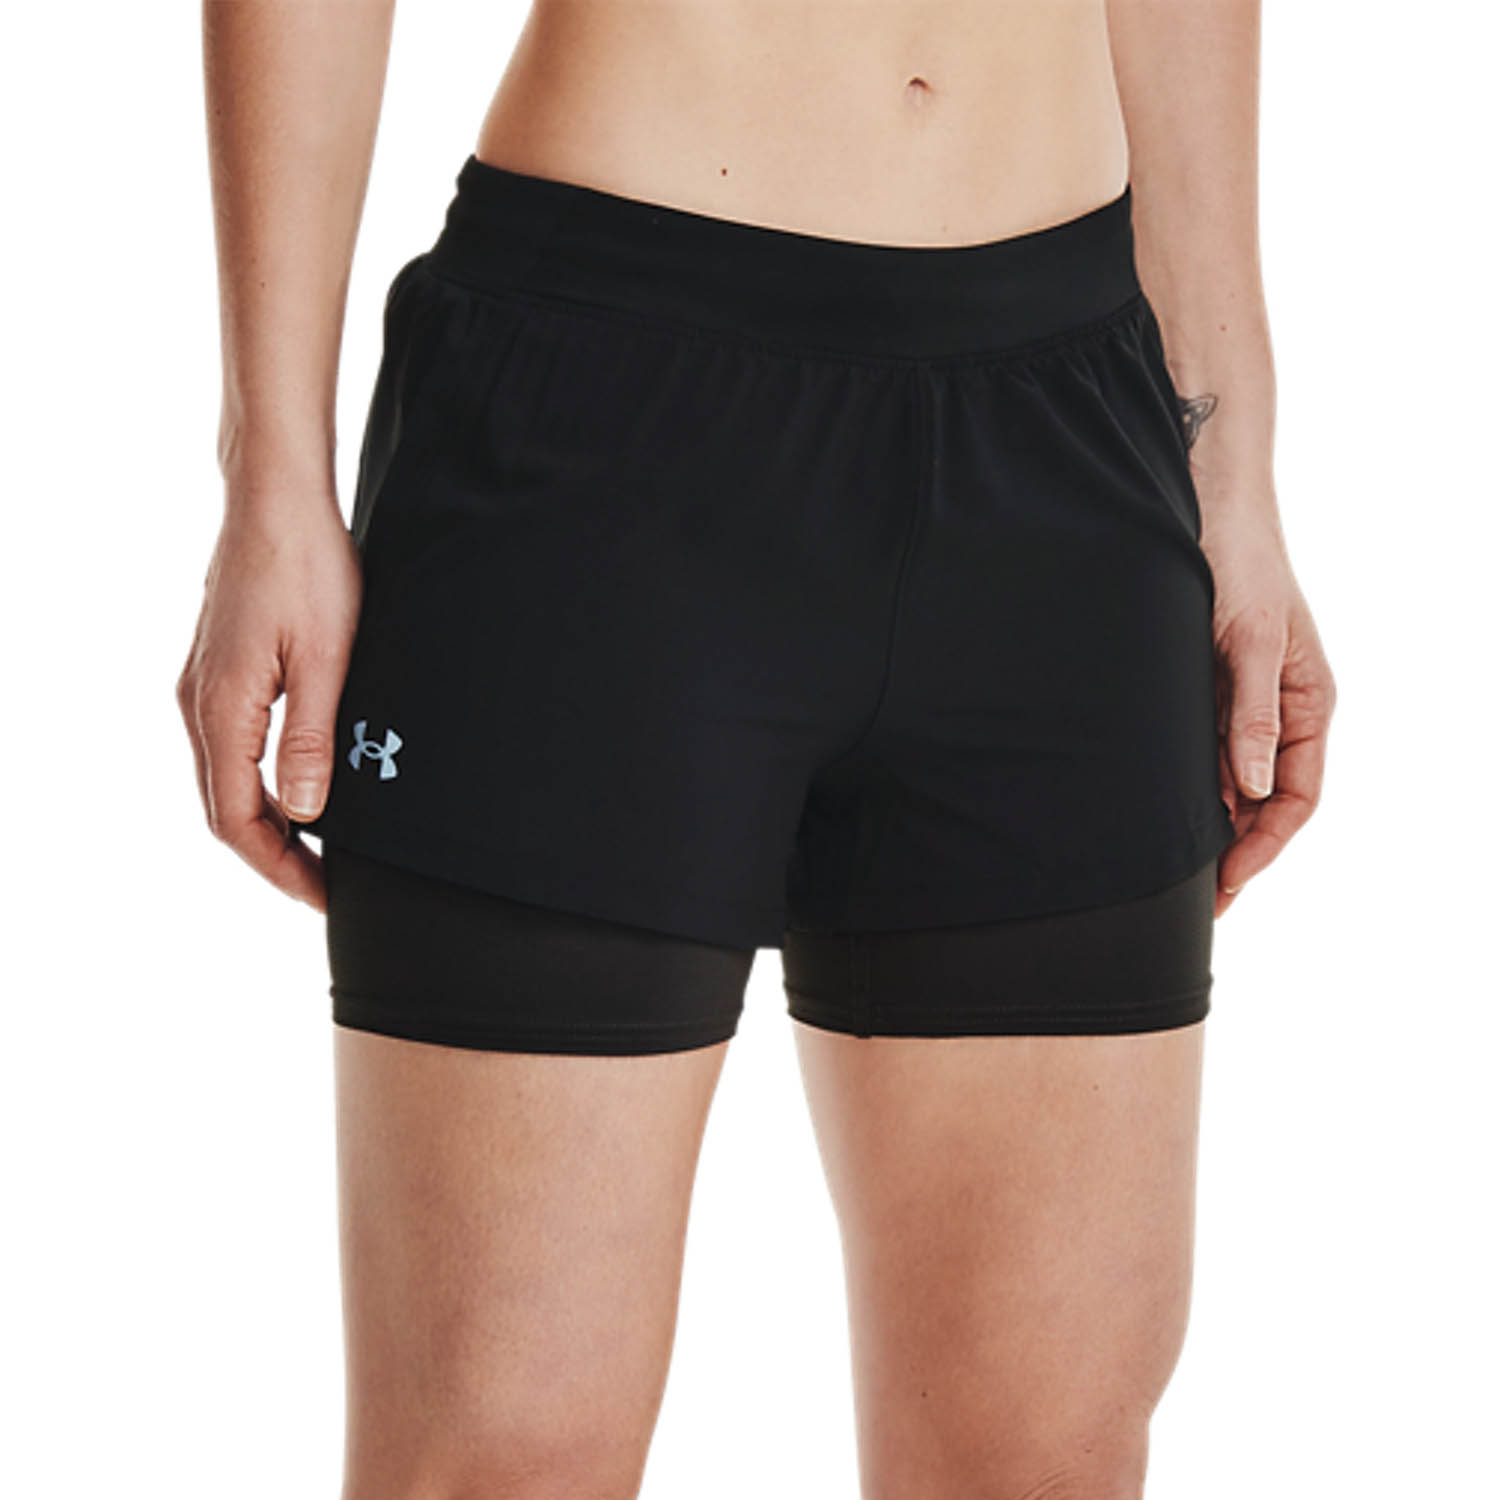 Under Armour IsoChill 2 in 1 3in Shorts - Black/Reflective